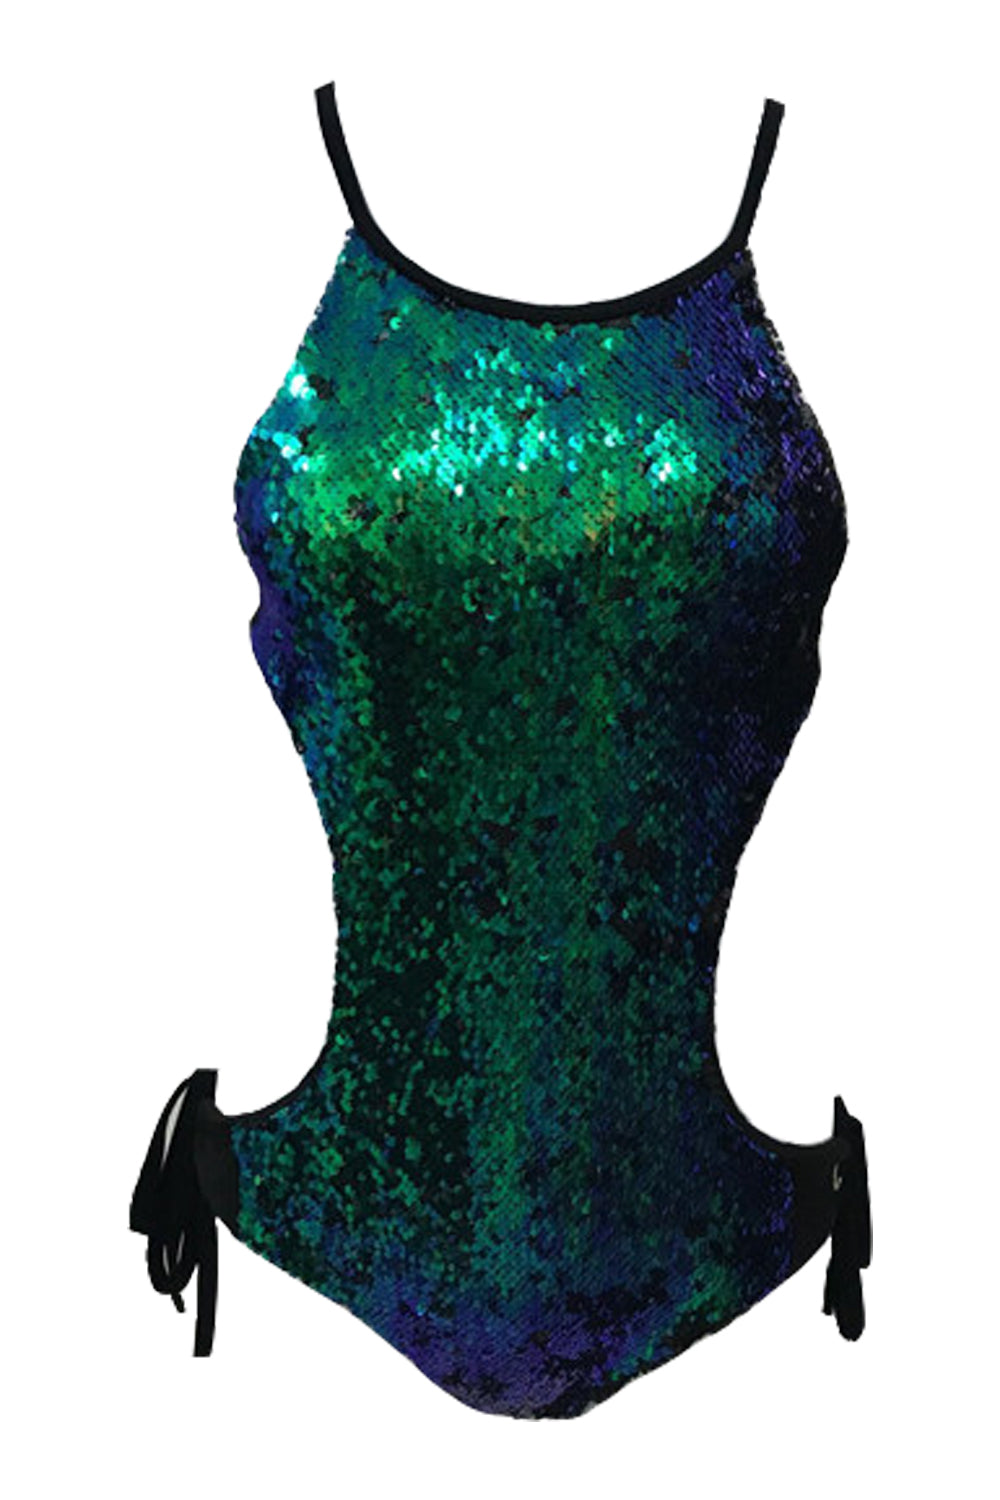 Iyasson Bling-Bling Sequins One-piece Swimsuit